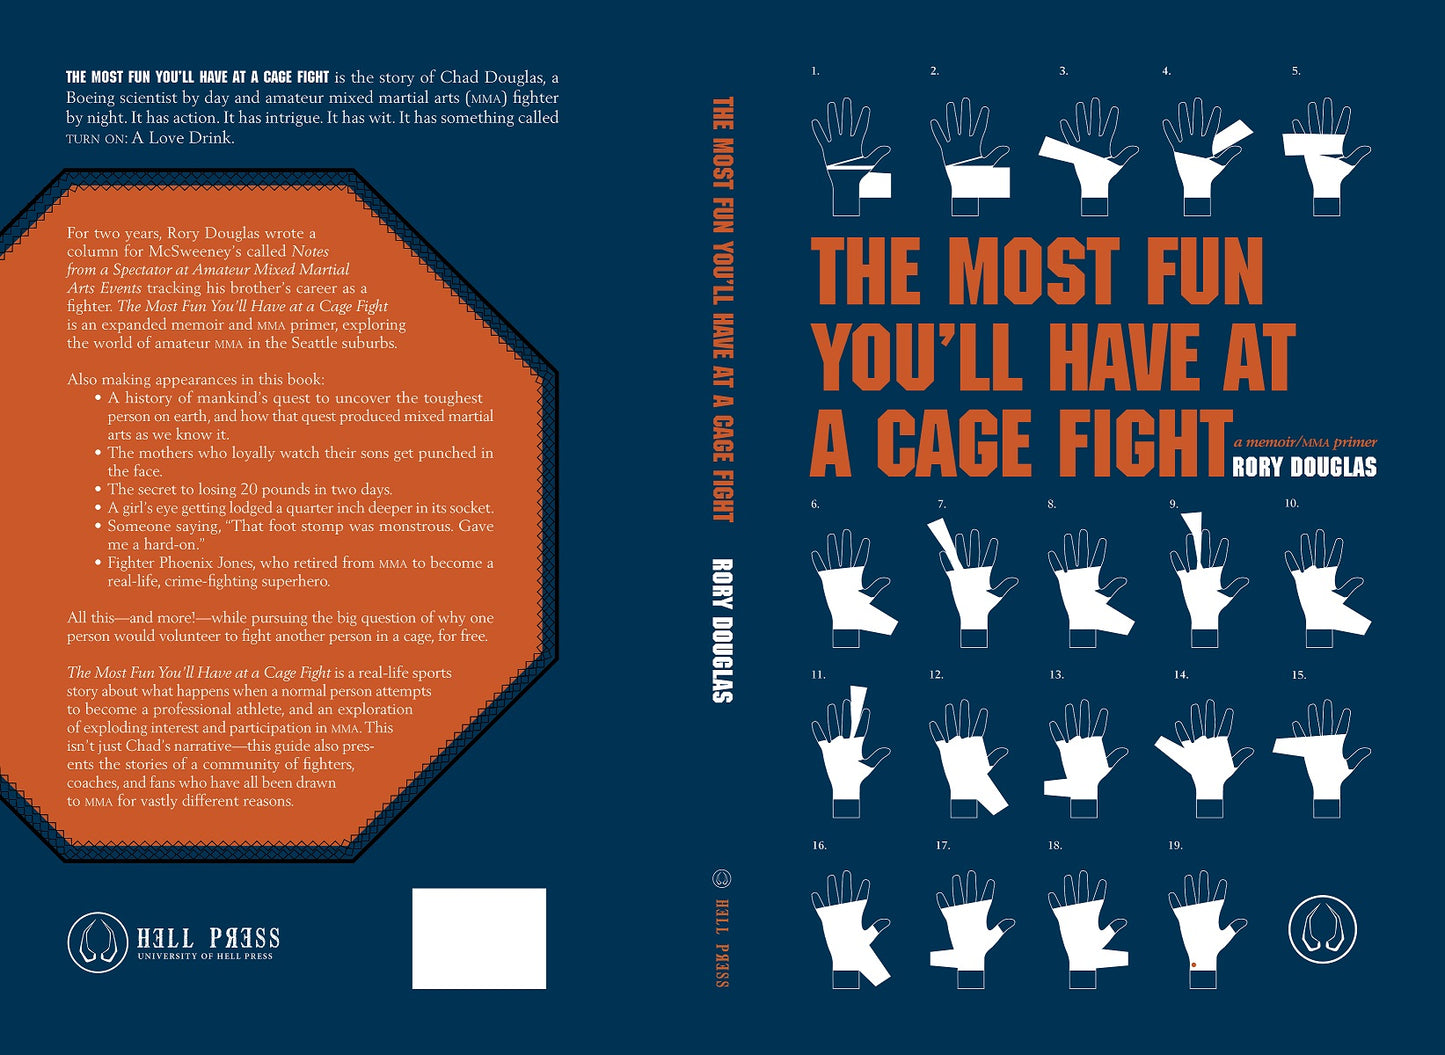 The Most Fun You’ll Have at a Cage Fight by Rory Douglas